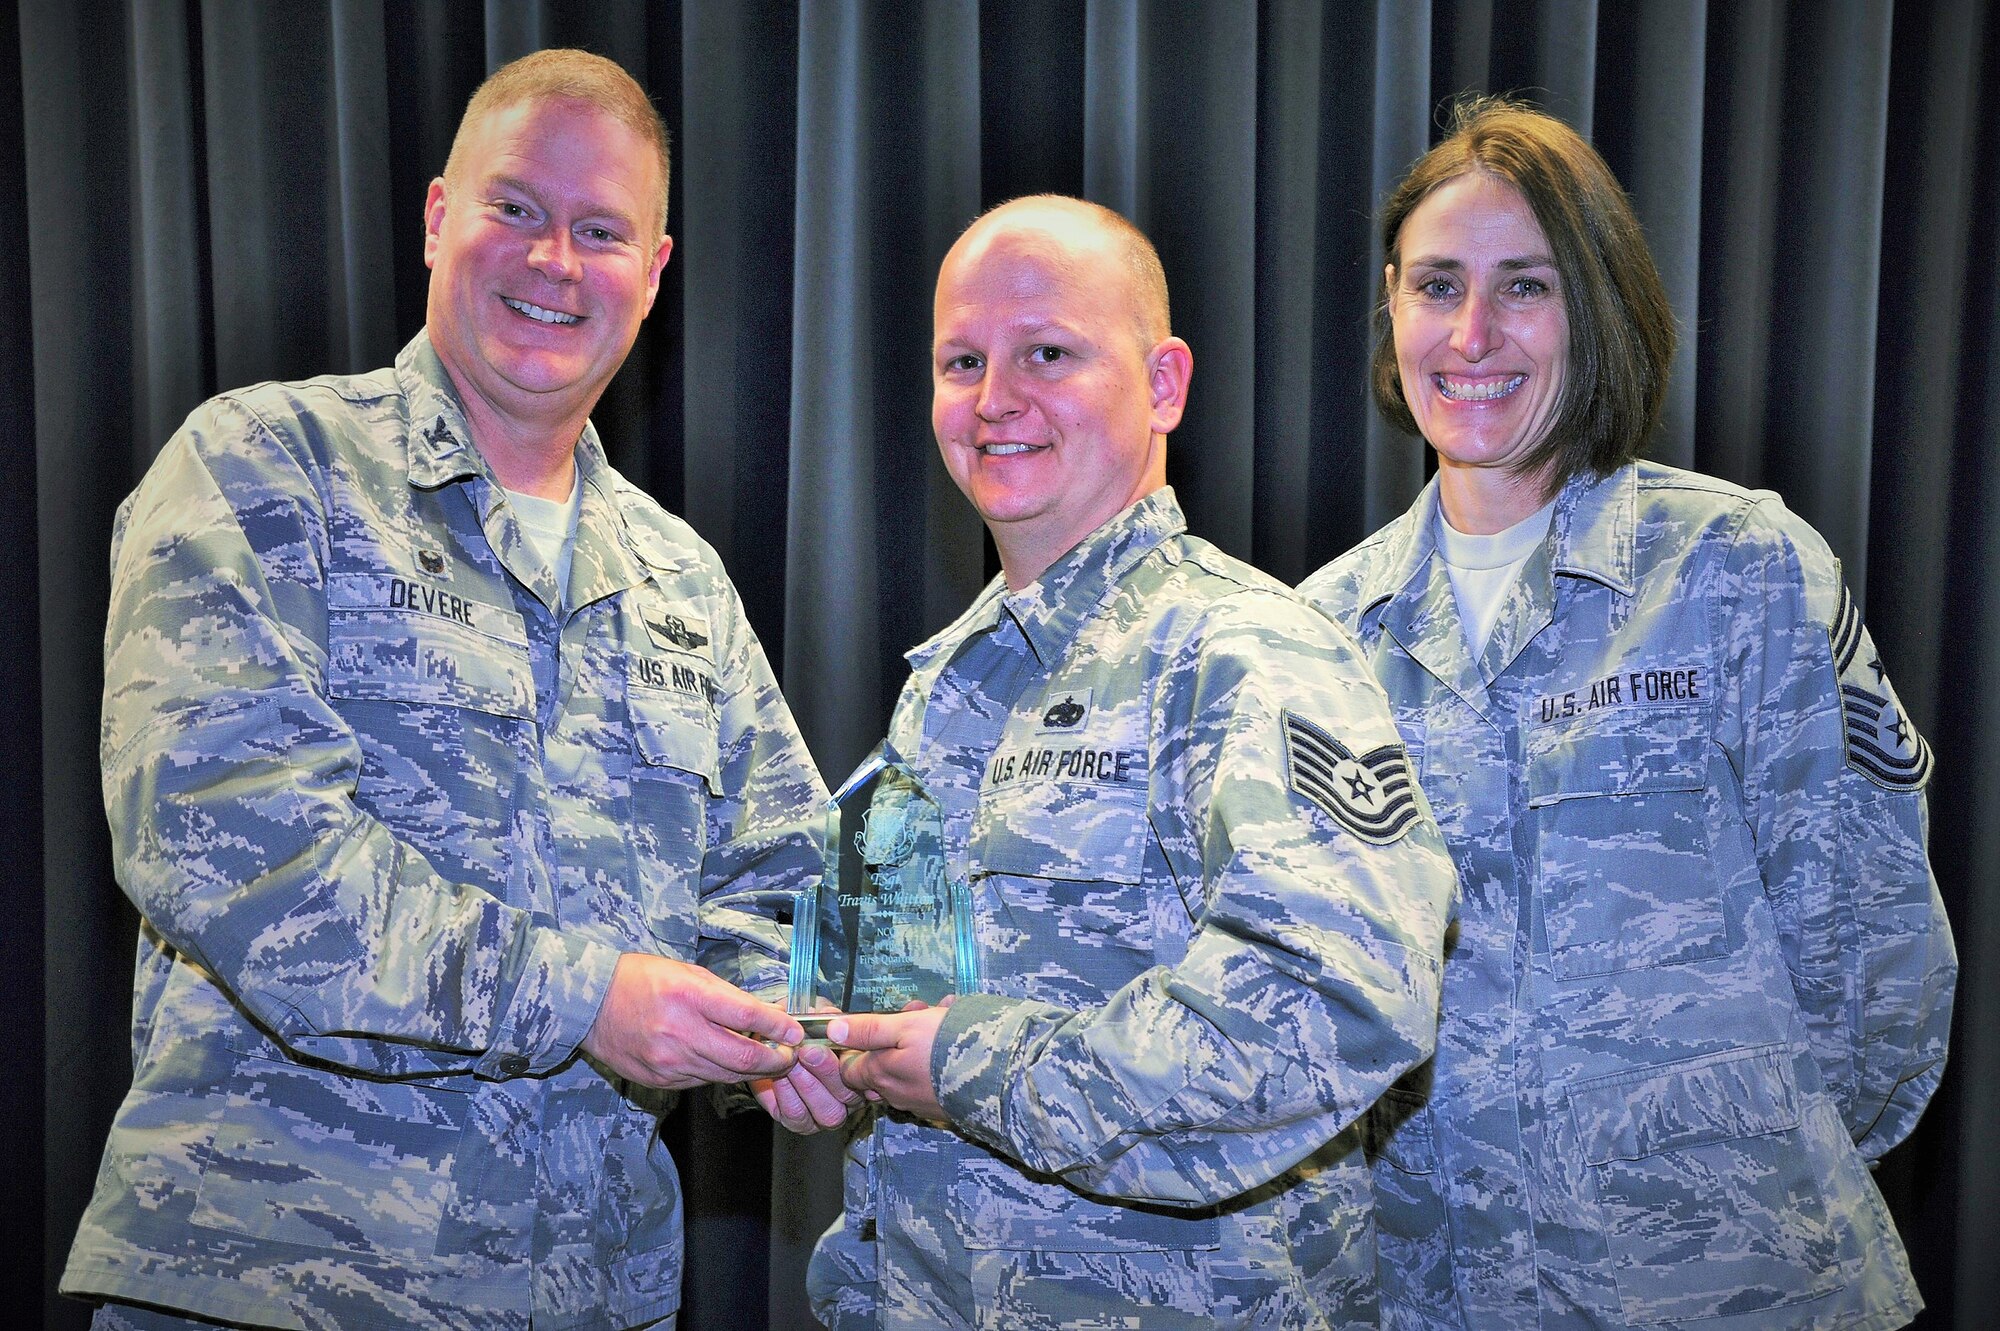 Tech. Sgt. Travis Whitton, 302nd Maintenance Squadron, receives the 302nd Airlift Wing’s 2017 1st Quarter award in the NCO category from Col. James DeVere, 302nd Airlift Wing commander, and Chief Master Sgt. Vicki Robertson, 302nd AW command chief, during a ceremony at Peterson Air Force Base, Colo., June 4, 2017. As part of the Reserve wing’s quarterly awards program, Citizen Airmen are nominated for excellence in leadership, job performance, significant self-improvement and contributions to their on and off-base communities. The other 2017 First Quarter Award winners are: Airman 1st Class Kwesi Hanson, 302nd Logistics Readiness Squadron, Airman category, Senior Master Sgt. Mark Skarban, 302nd Operations Support Squadron, Senior NCO category, Capt. Ashlea Garcia, 302nd Operations Support Squadron, company grade officer category, Lt. Col. Heather Lyons, 302nd Operations Group, field grade officer category.   (U.S. Air Force photo/1st Lt. Stephen J. Collier)